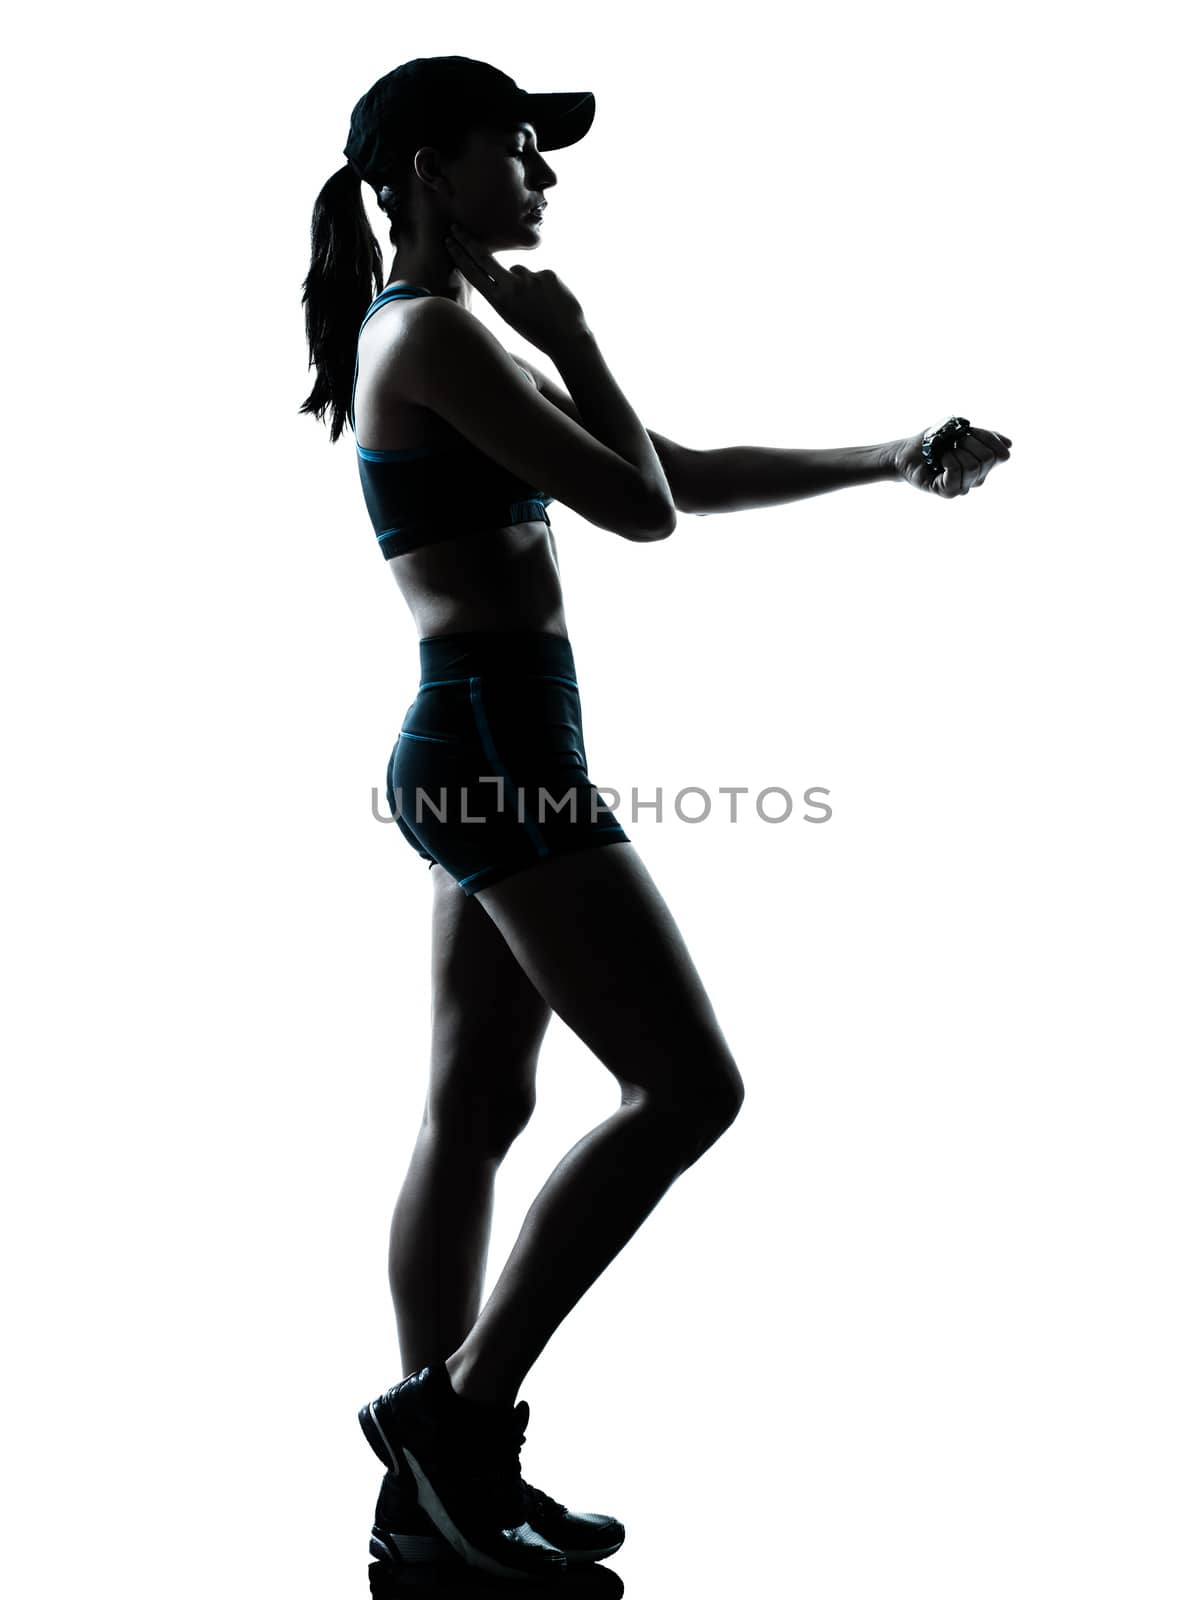 one caucasian woman runner jogger in silhouette studio isolated on white background